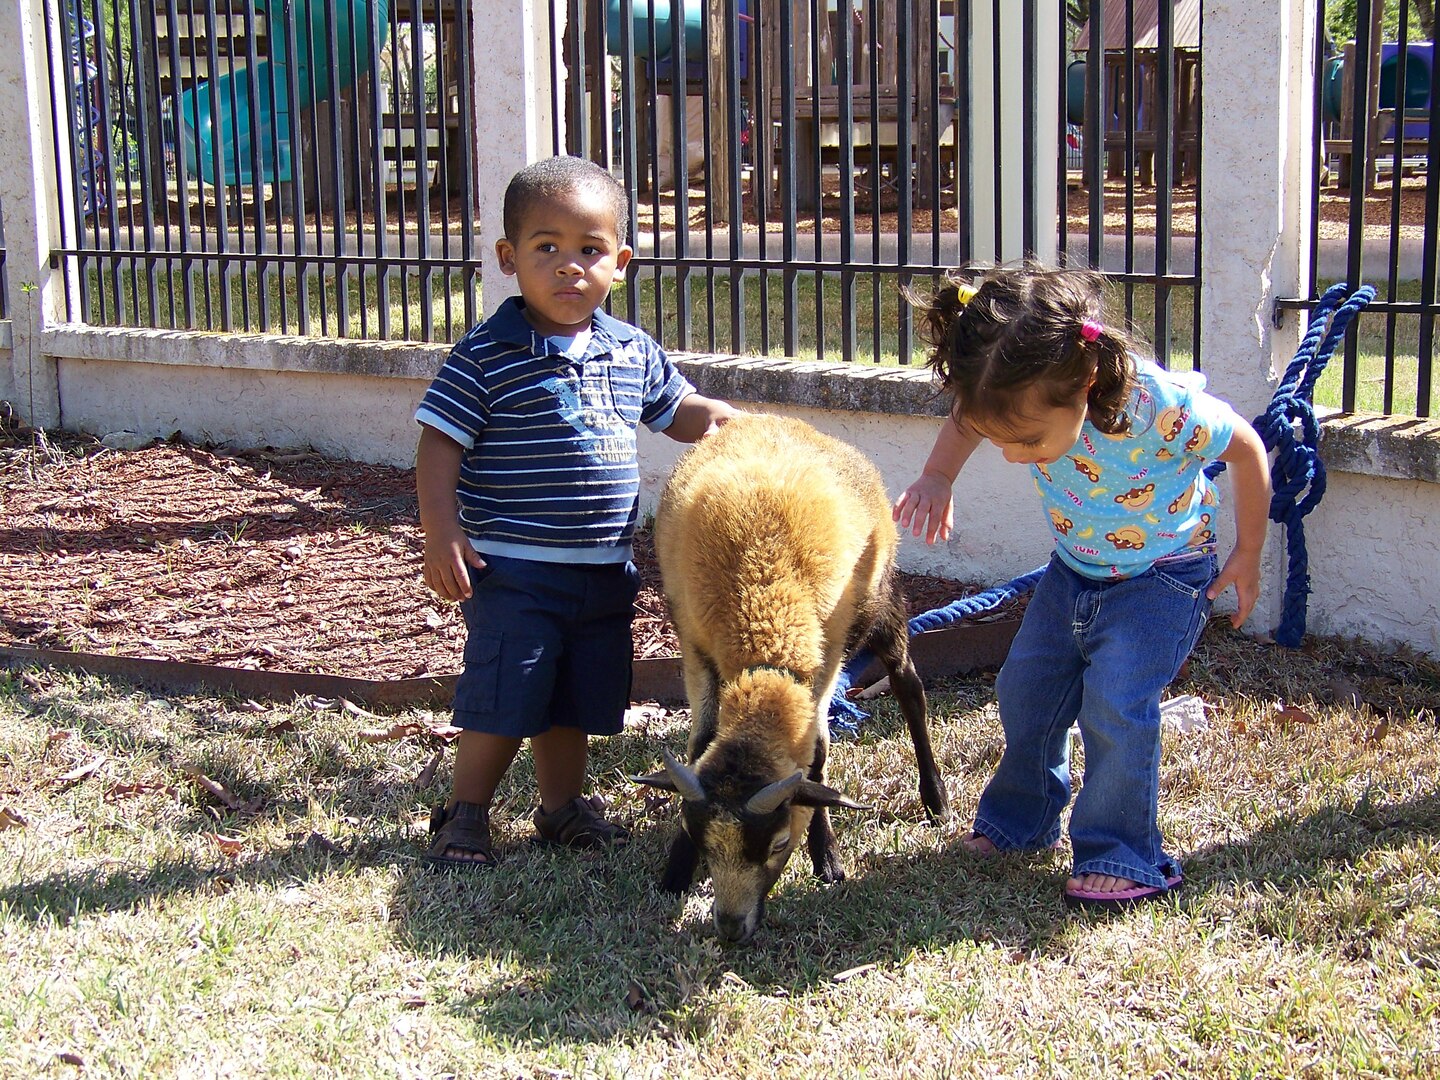 Giovoni Fleurimond (left) and Eva Mia Escobar pet a goat at the Fam-a-Ganza petting zoo. (Photo by Maggie Armstrong)